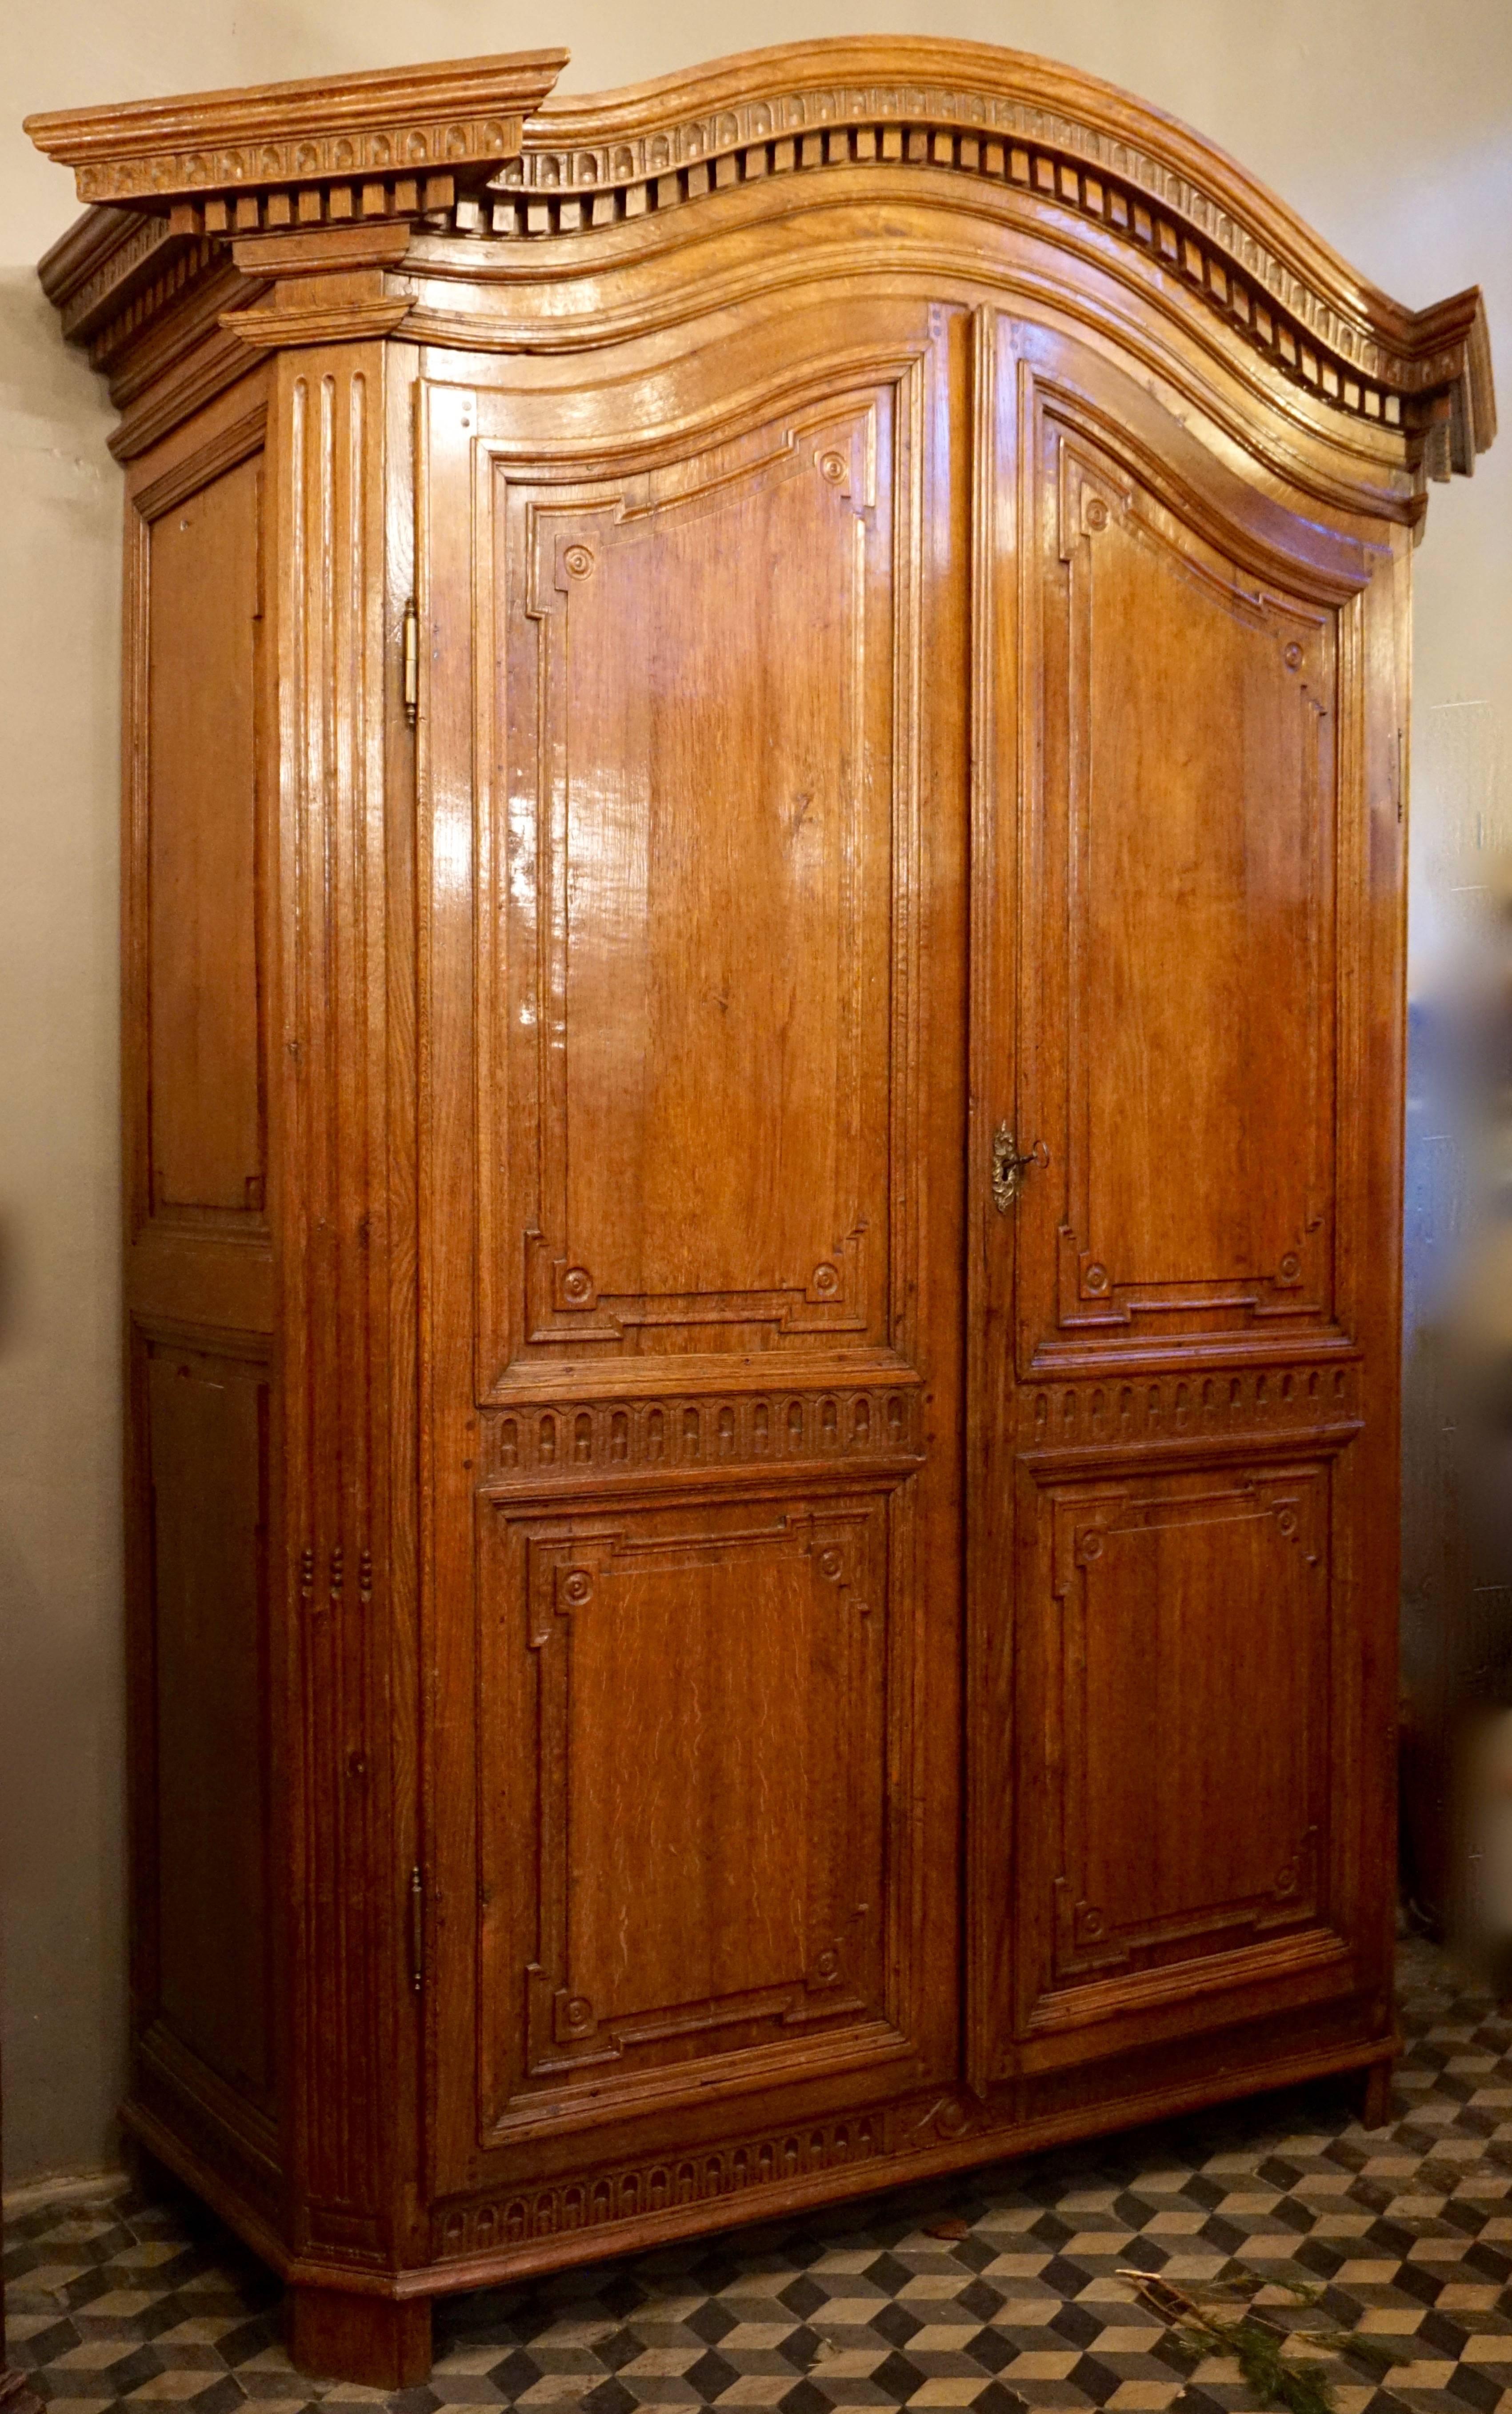 An elegant honey, colored oak armoire, Flemish, circa 1785.
With two richly moulded paneled doors and sides and a lovely ‘chapeau - de gendarme ‘corniche, standing proud from the cut-out corners and carved all-over in the Louis XVI style and of the